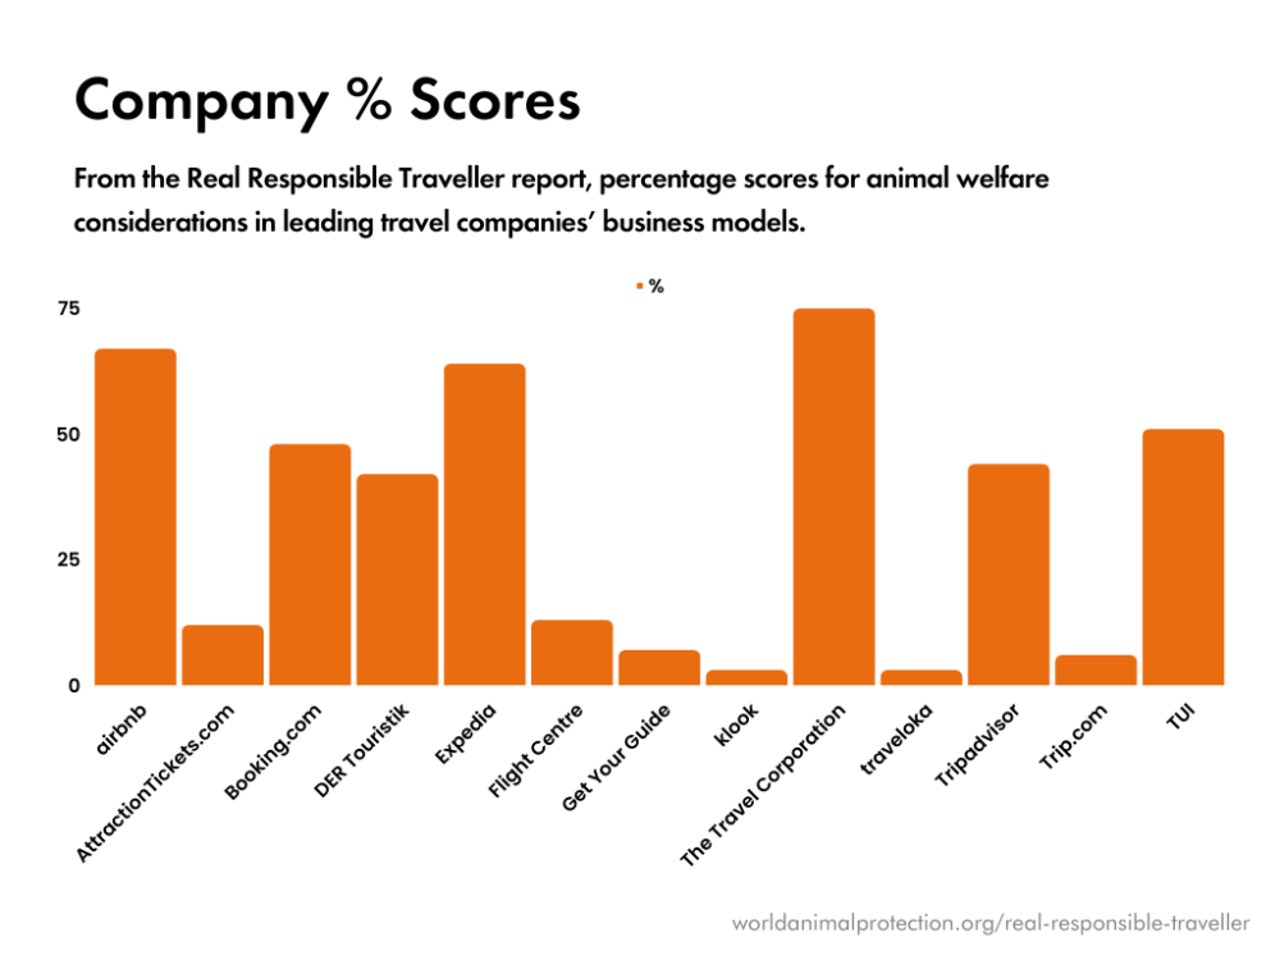 From the Real Responsible Traveller report, percentage scores for animal welfare considerations in leading travel companies’ business models.